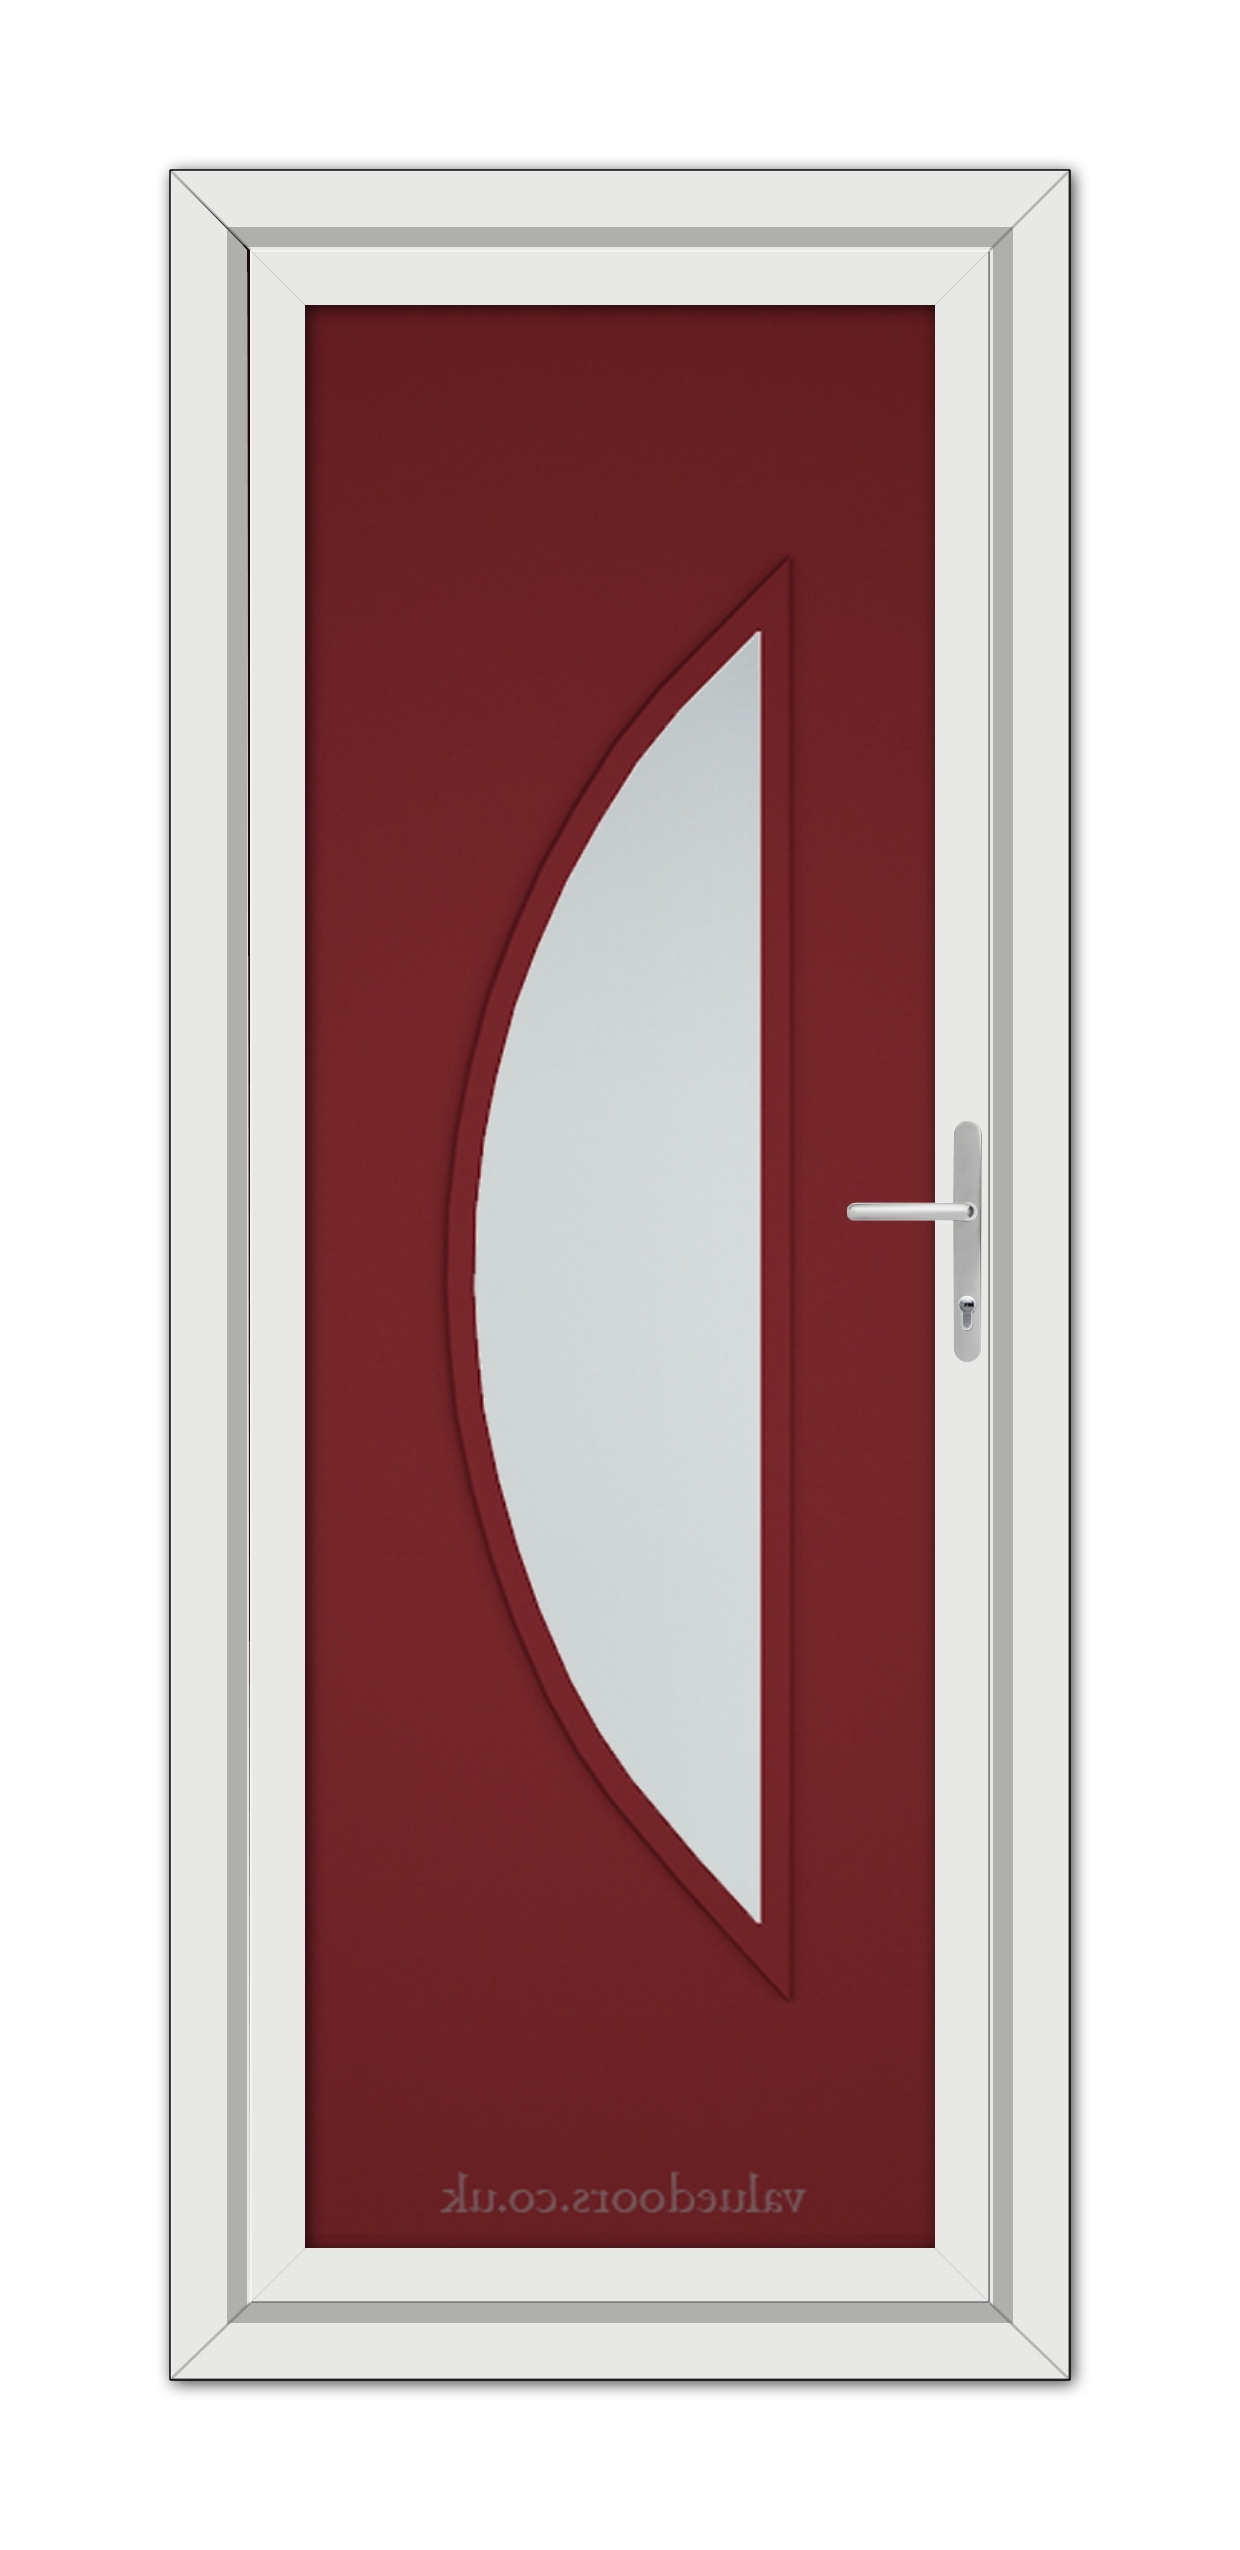 A Red Modern 5051 uPVC Door with a white frame.